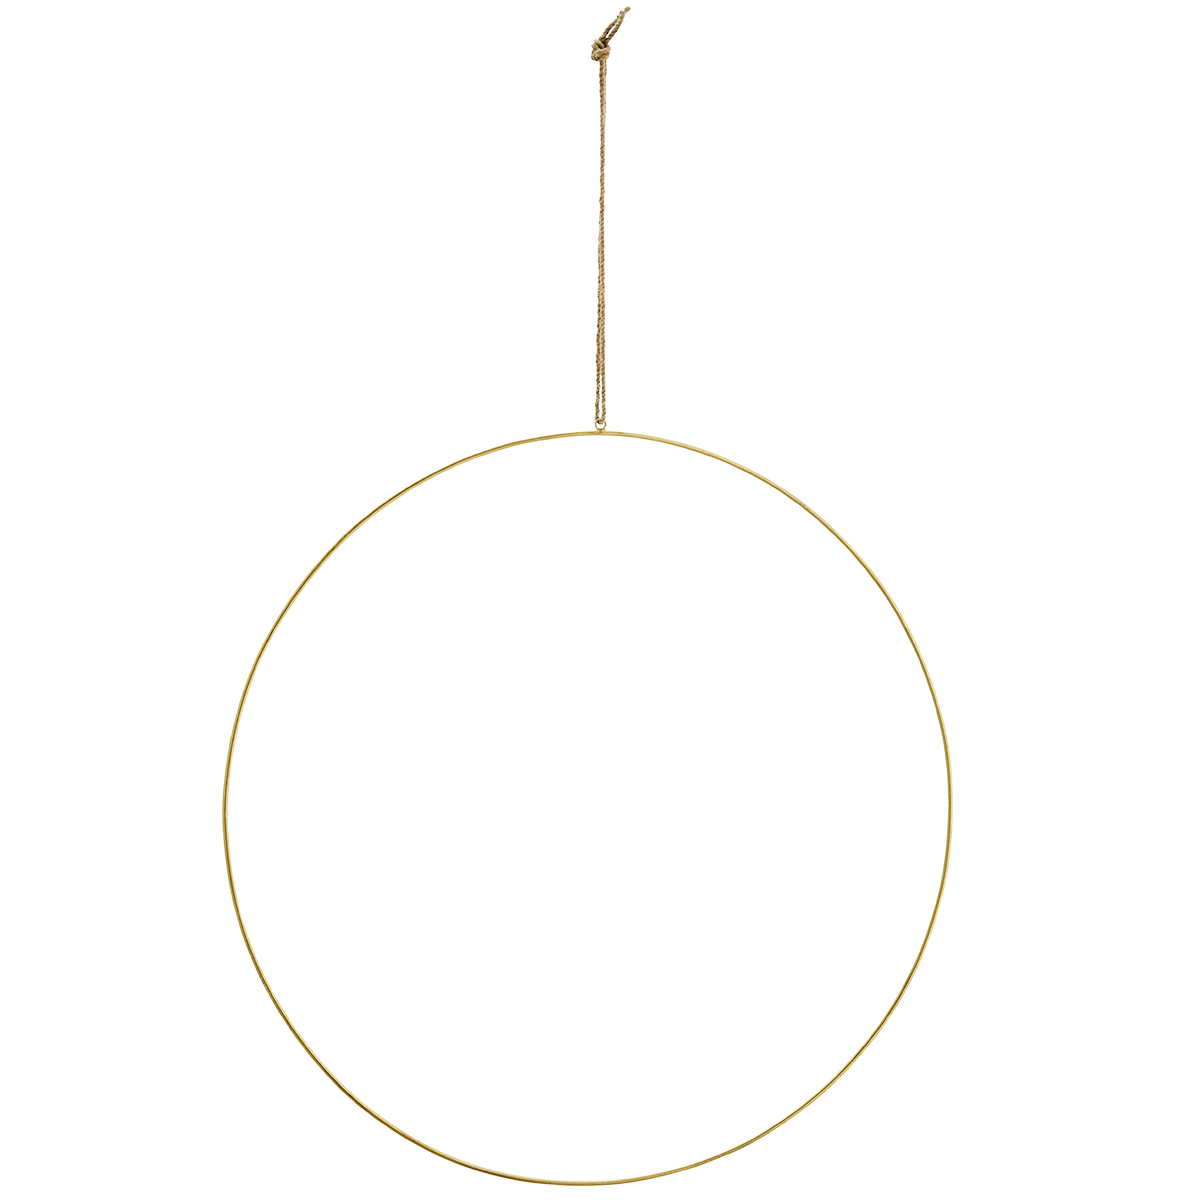 Wire ring